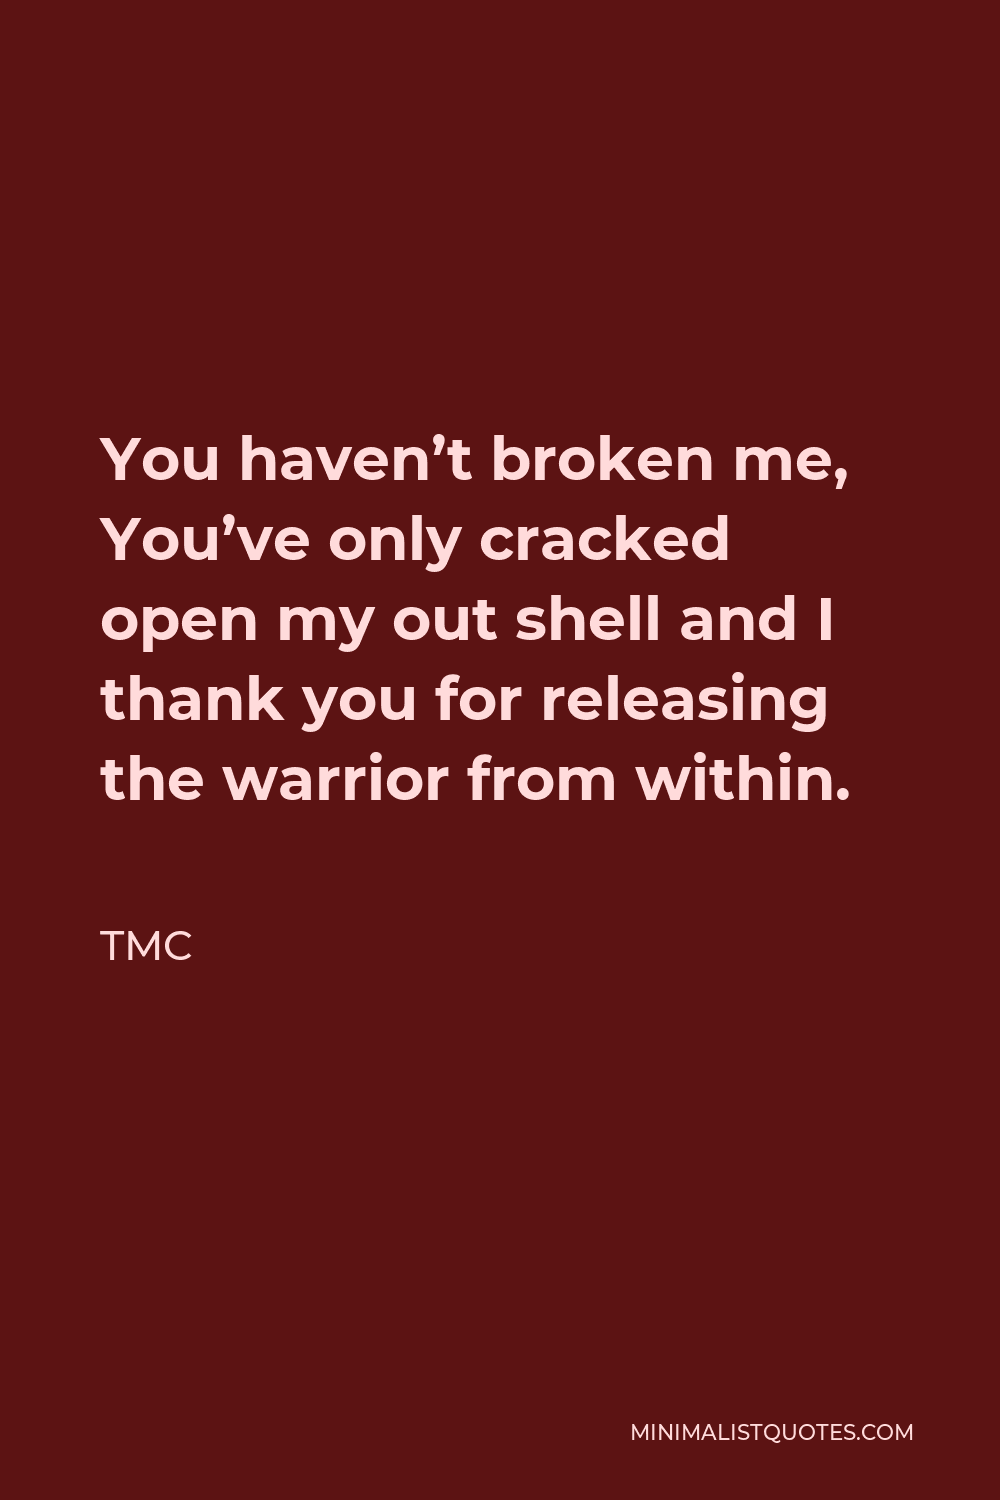 TMC Quote - You haven’t broken me, You’ve only cracked open my out shell and I thank you for releasing the warrior from within.